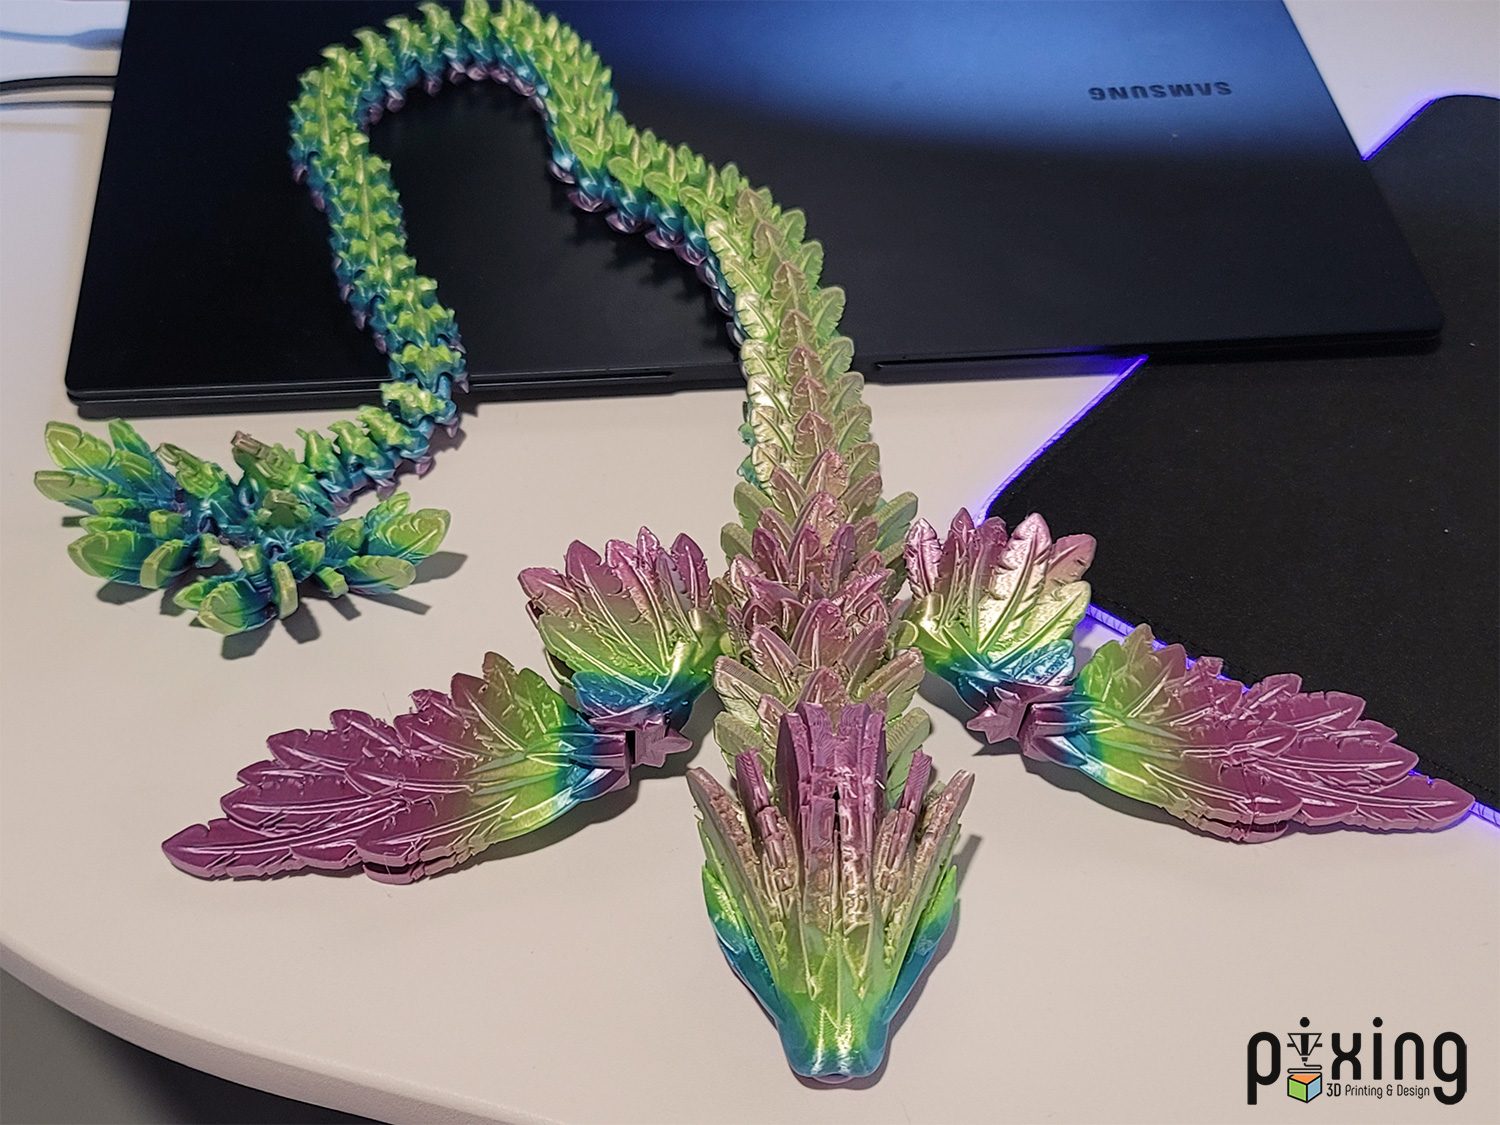 3D Printed Flying Serpent Dragon Top View - Articulating Toy